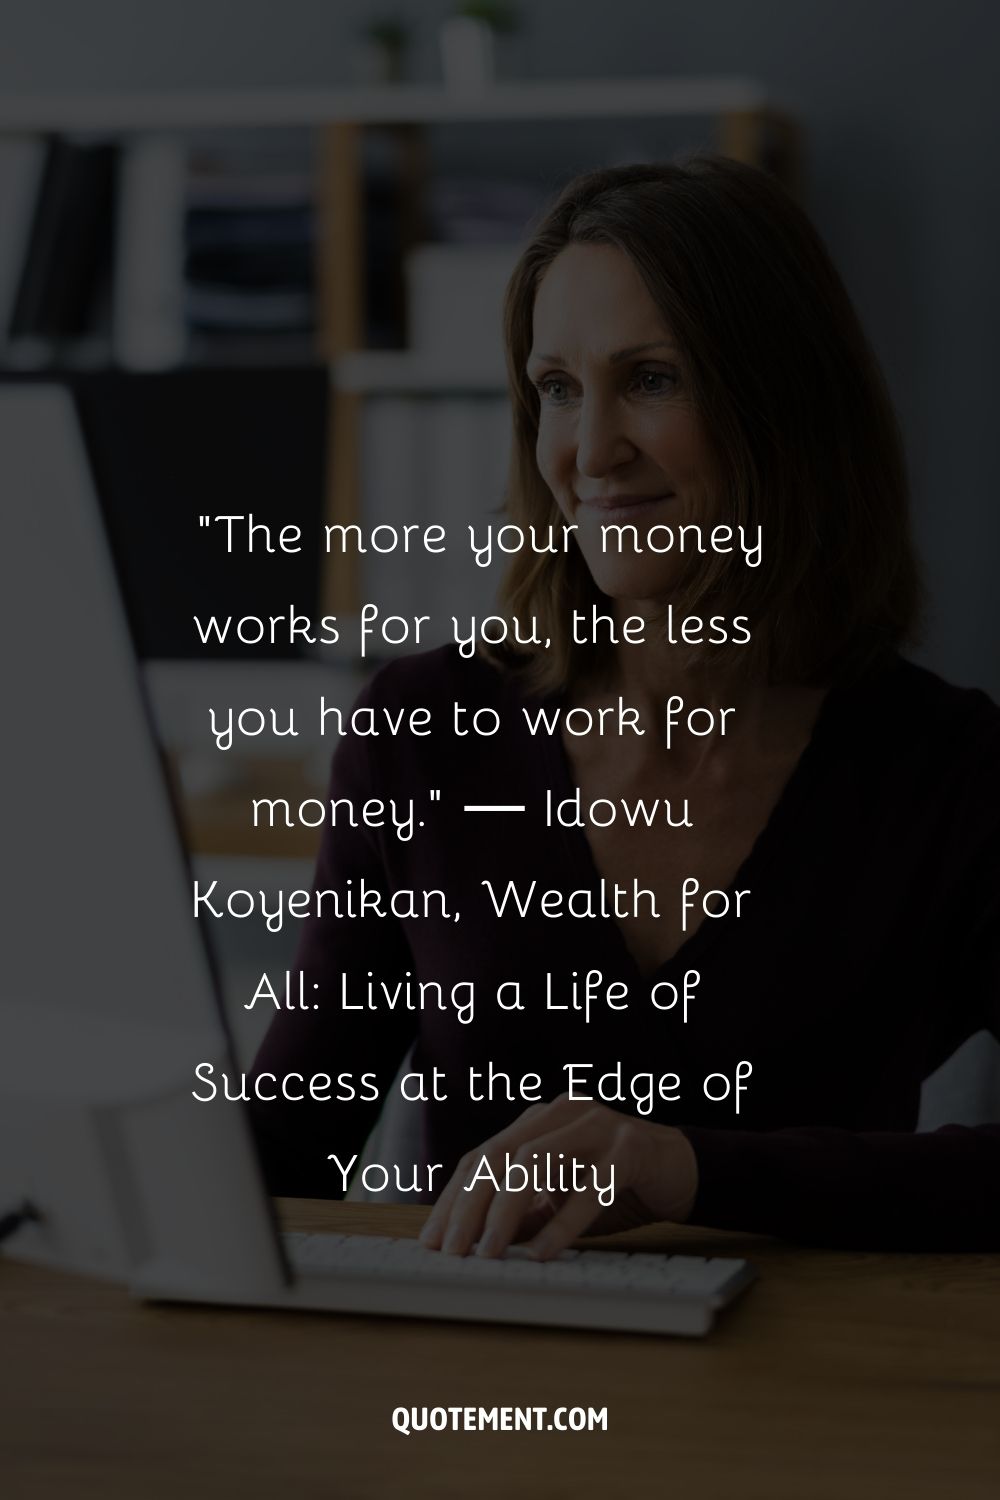 “The more your money works for you, the less you have to work for money.” ― Idowu Koyenikan, Wealth for All Living a Life of Success at the Edge of Your Abilit